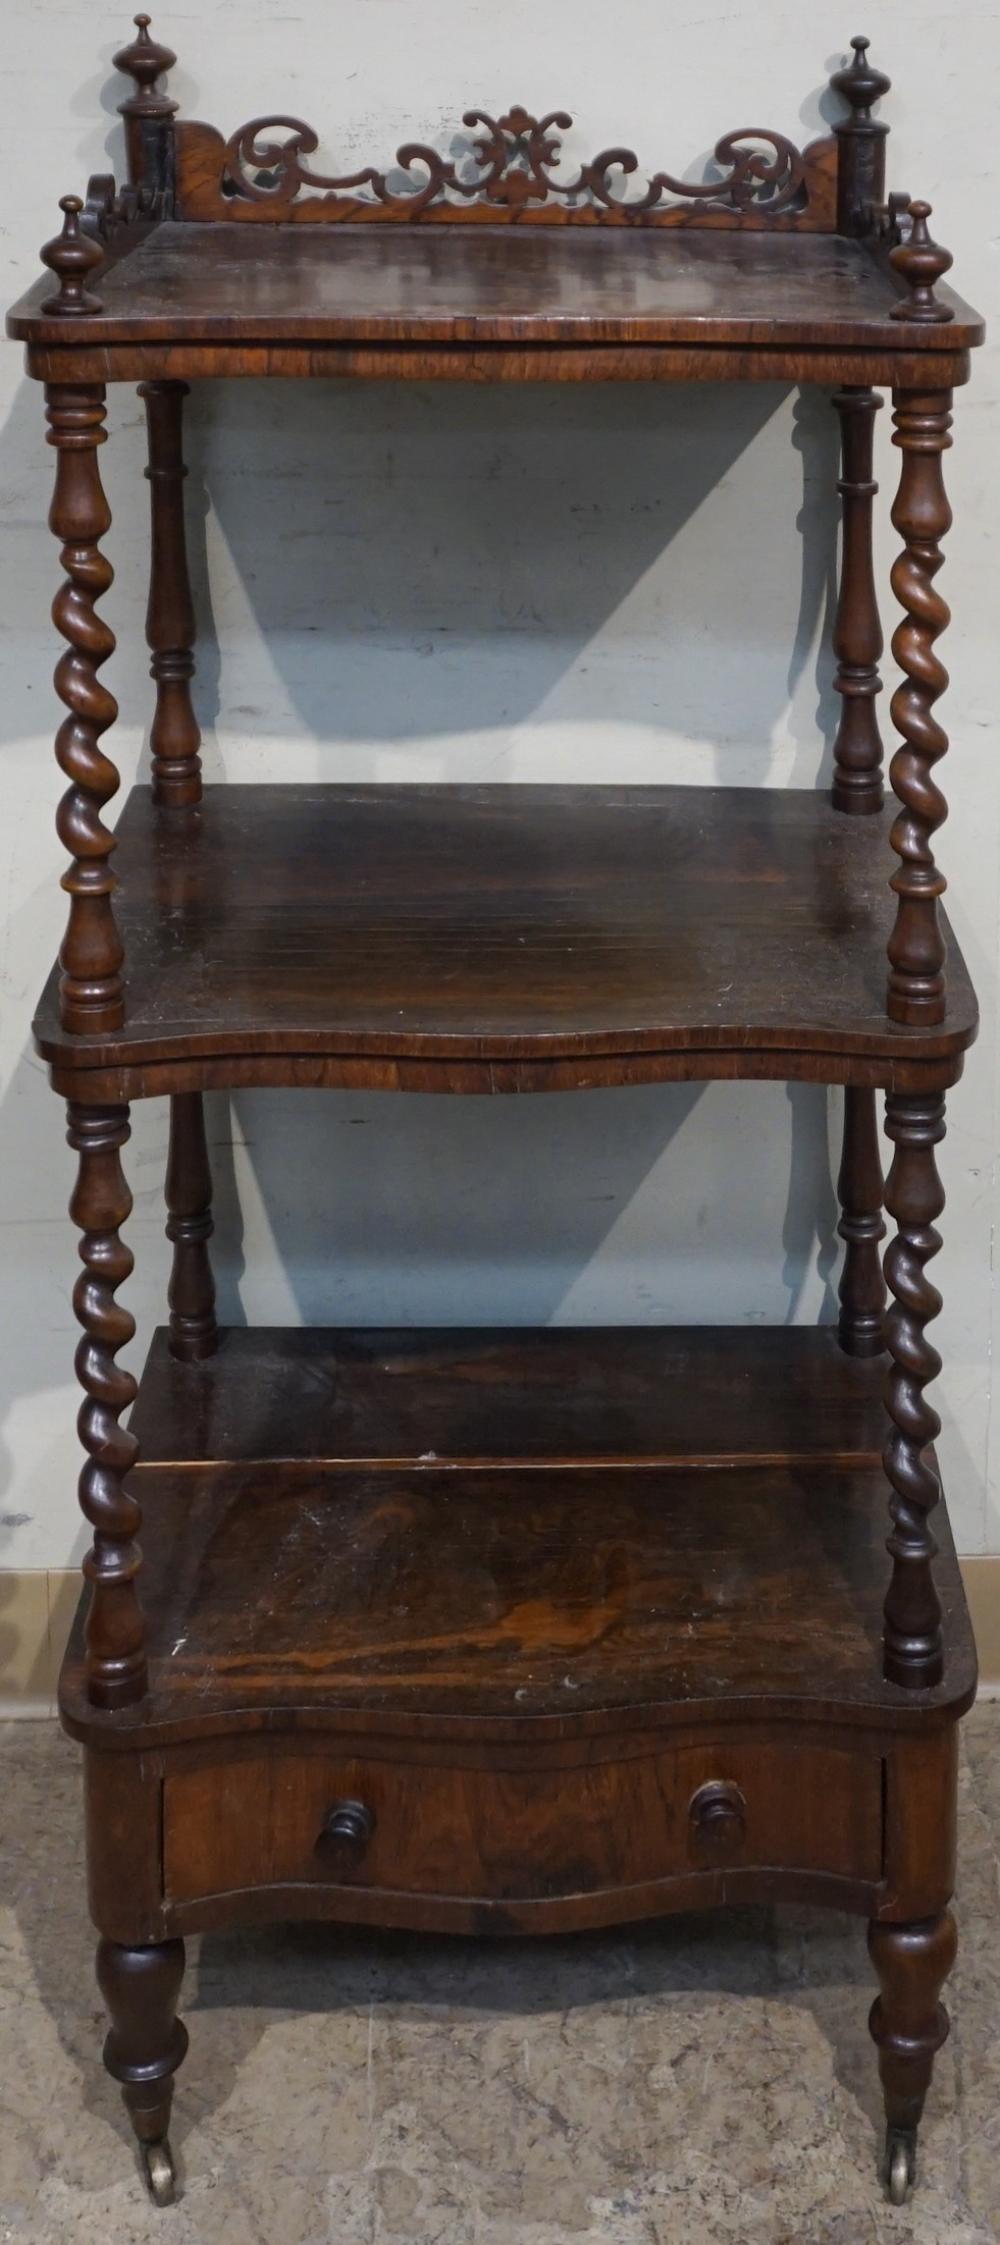 VICTORIAN ROSEWOOD ETAGERE 44 32d0a9